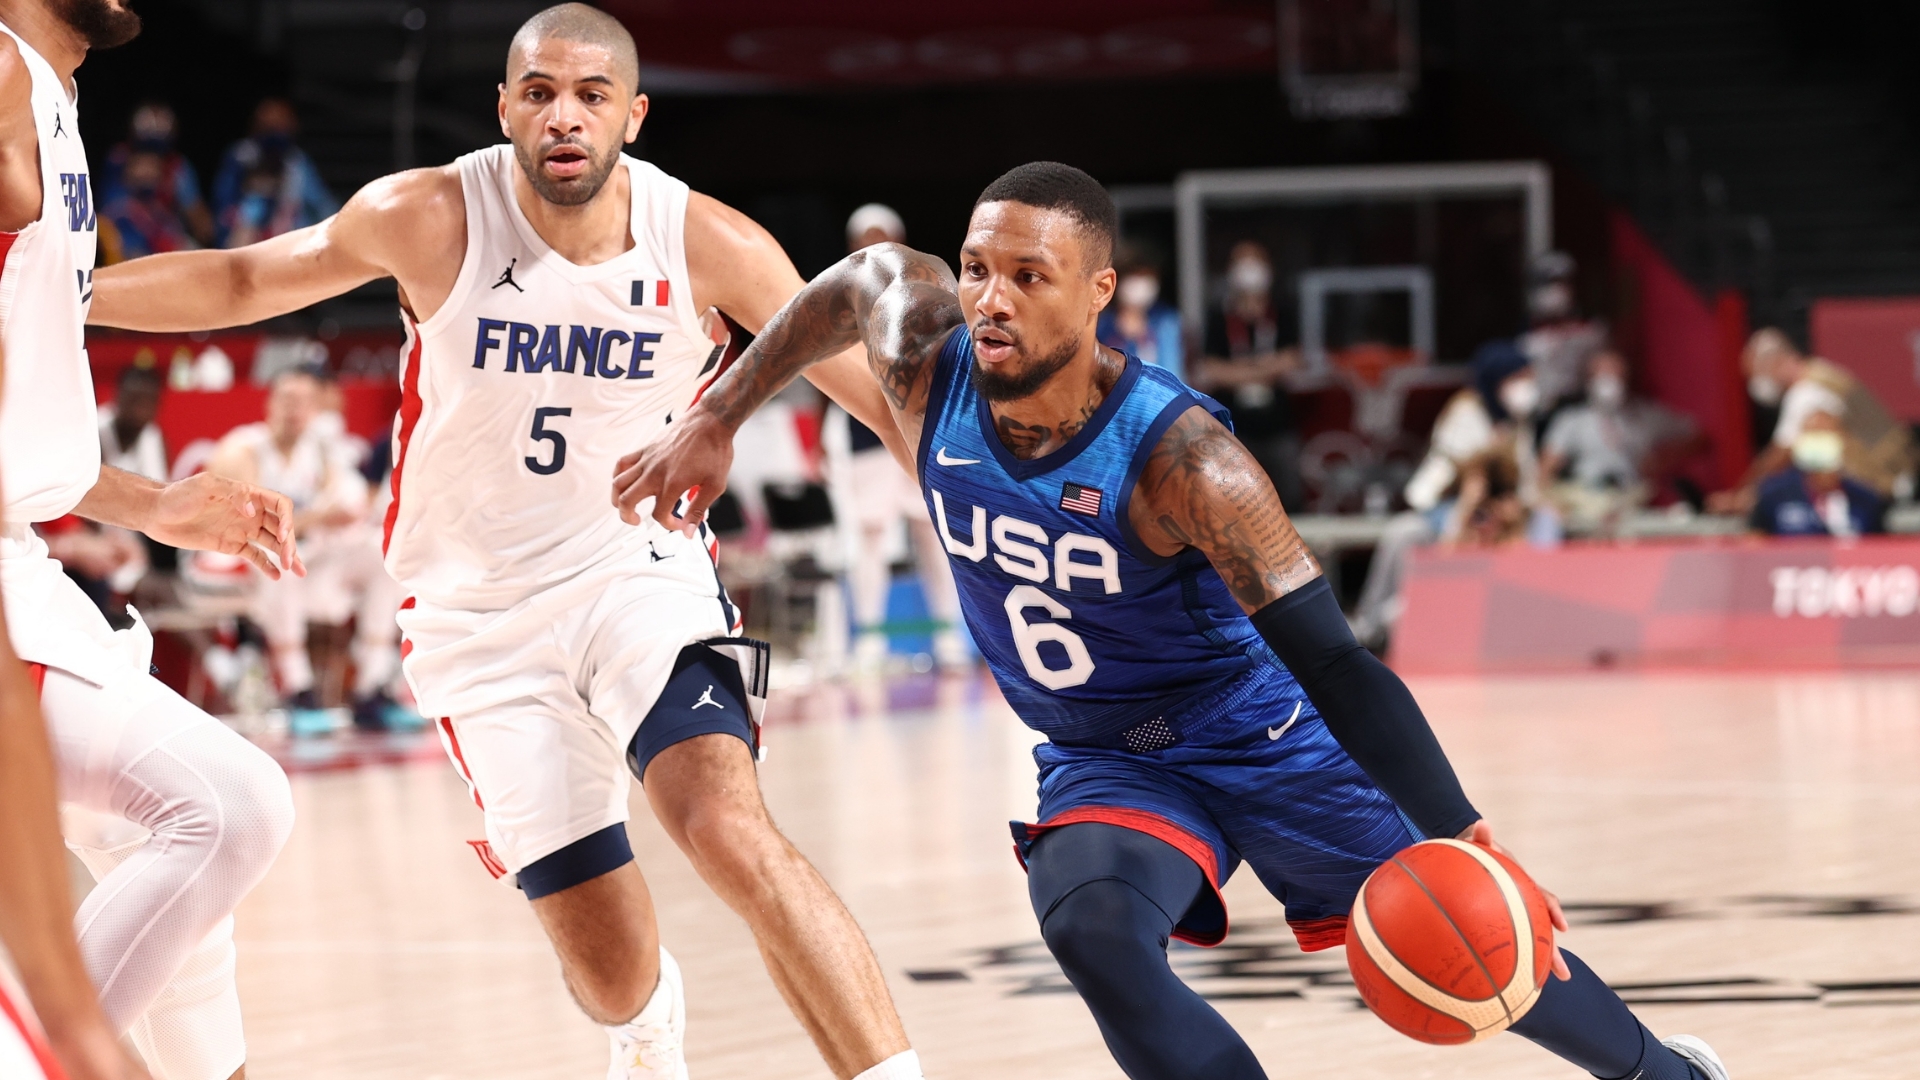 Tokyo Olympics: Team USA vs. France live score, updates and more | NBA.com  Canada | The official site of the NBA